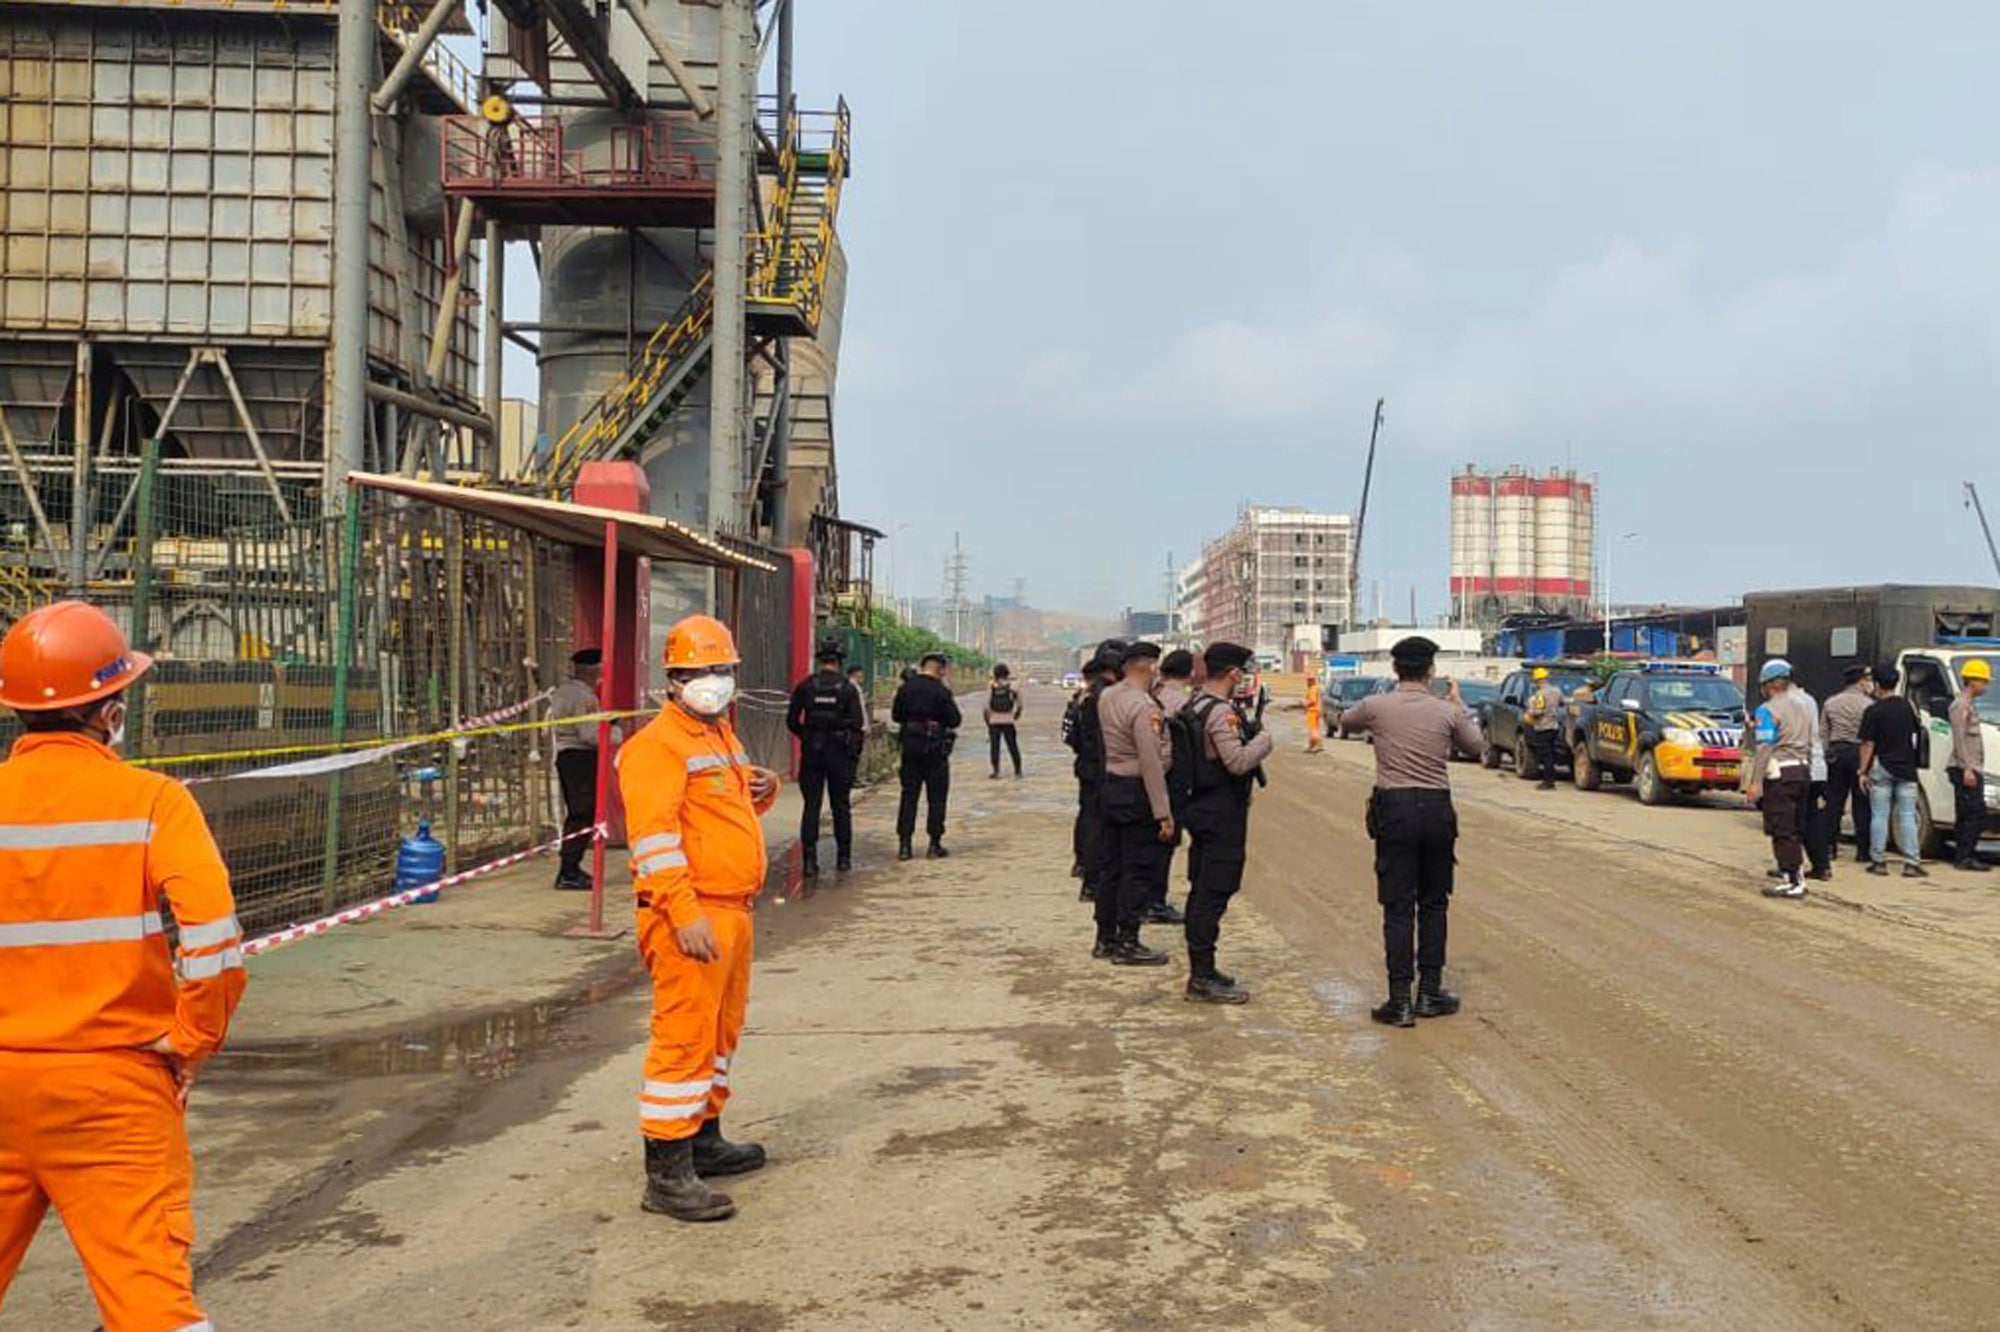 Police officers and workers stand near the site where a furnace explosion occurred at PT Indonesia Tsingshan Stainless Steel smelting plant in Morowali, Central Sulawesi